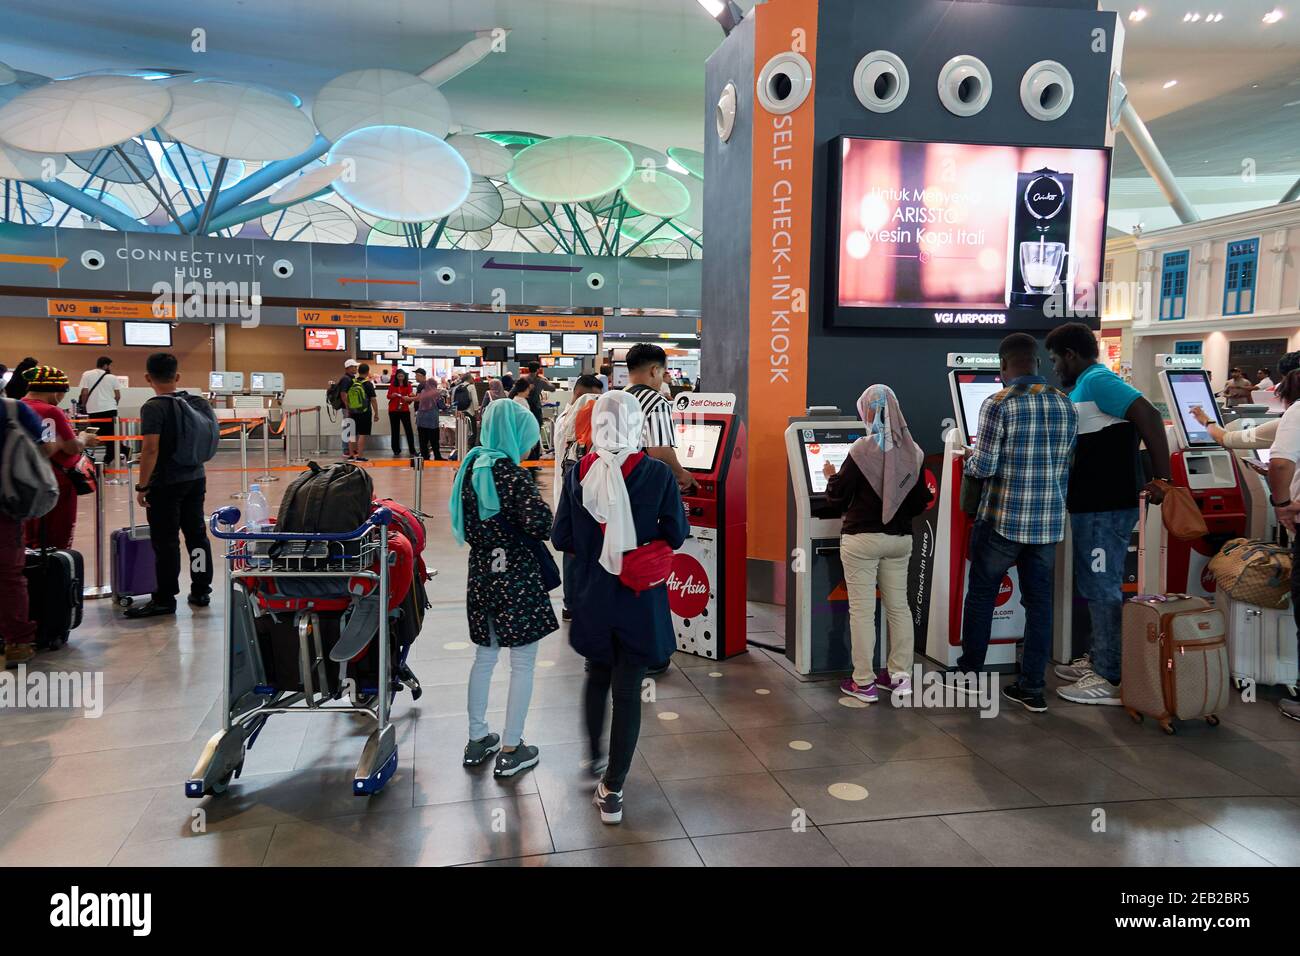 Self check-in terminals at Kuala Lumpur International Airport 2 also known simply as KLIA2, Malaysia Stock Photo